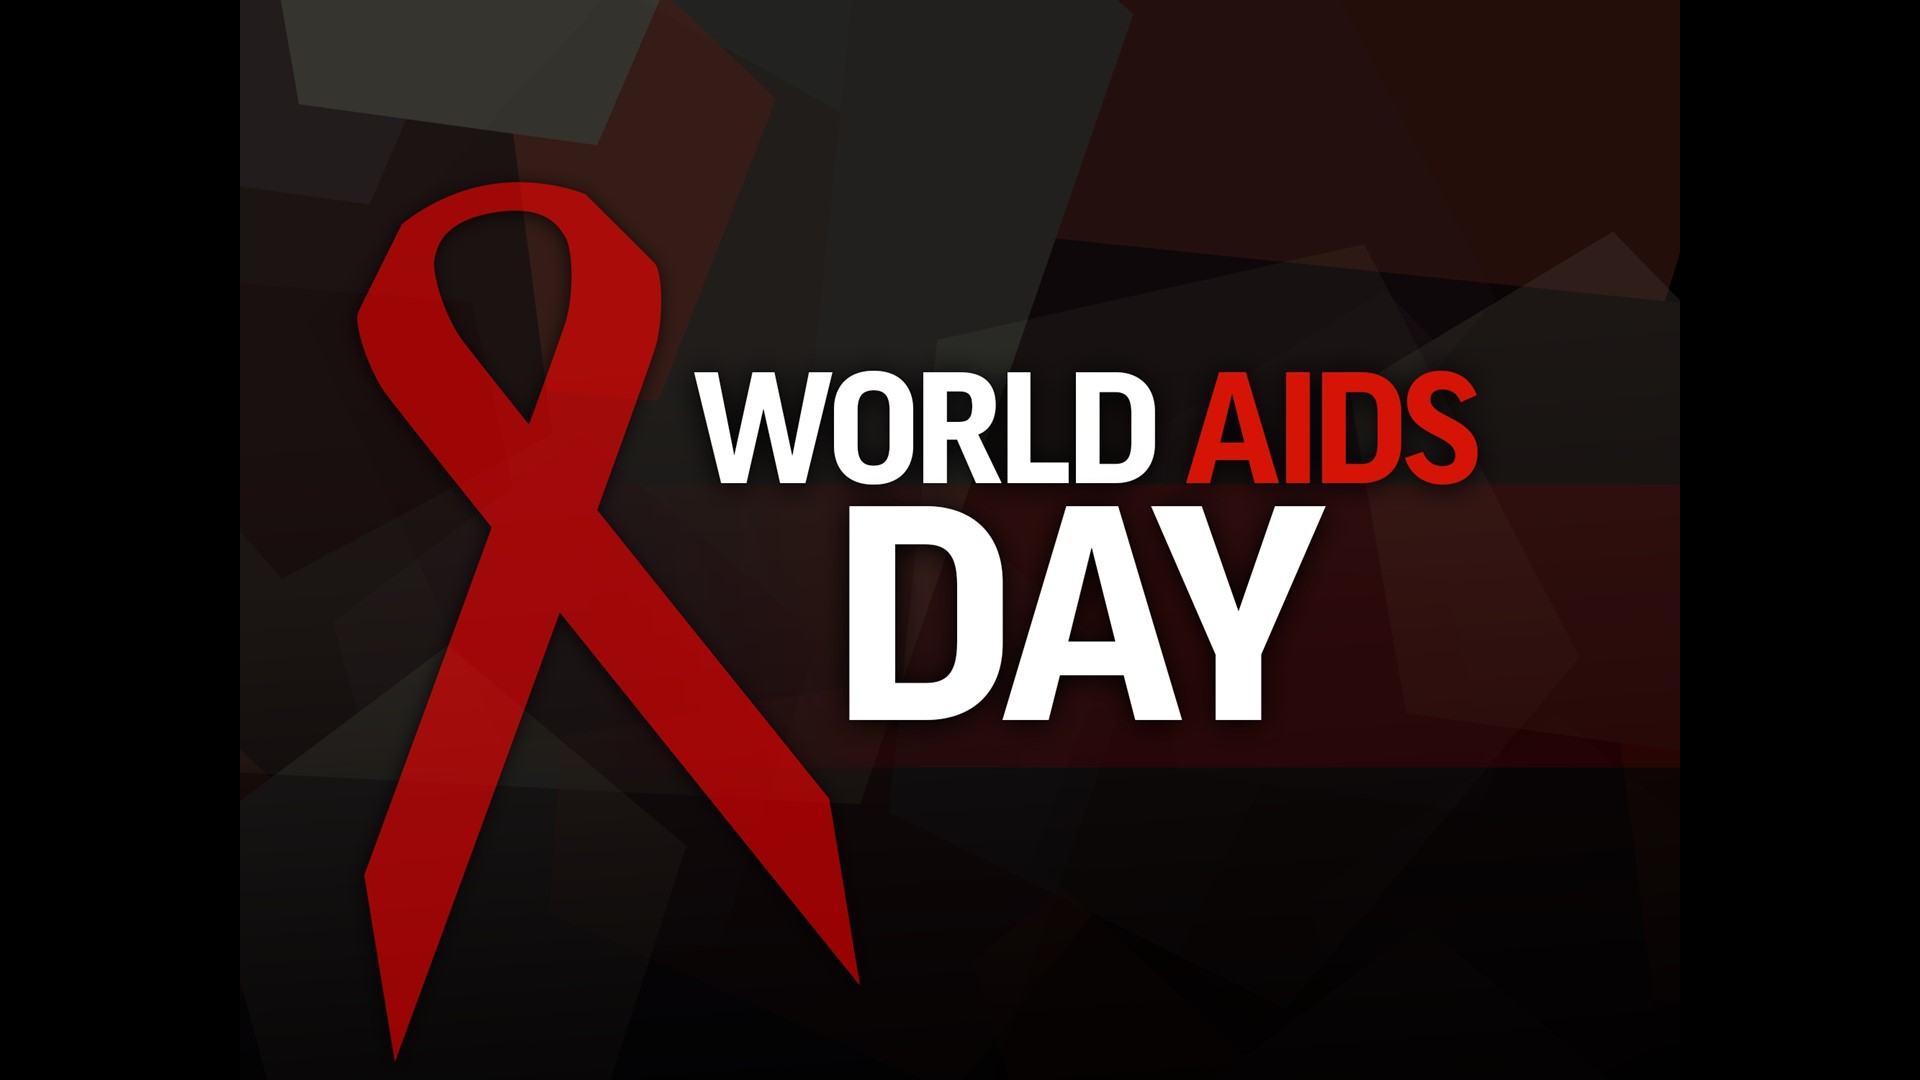 December 1 is World AIDS Day. It's a time to shed light on the disease, hear the stories of those impacted, raise awareness & reduce the stigmas.